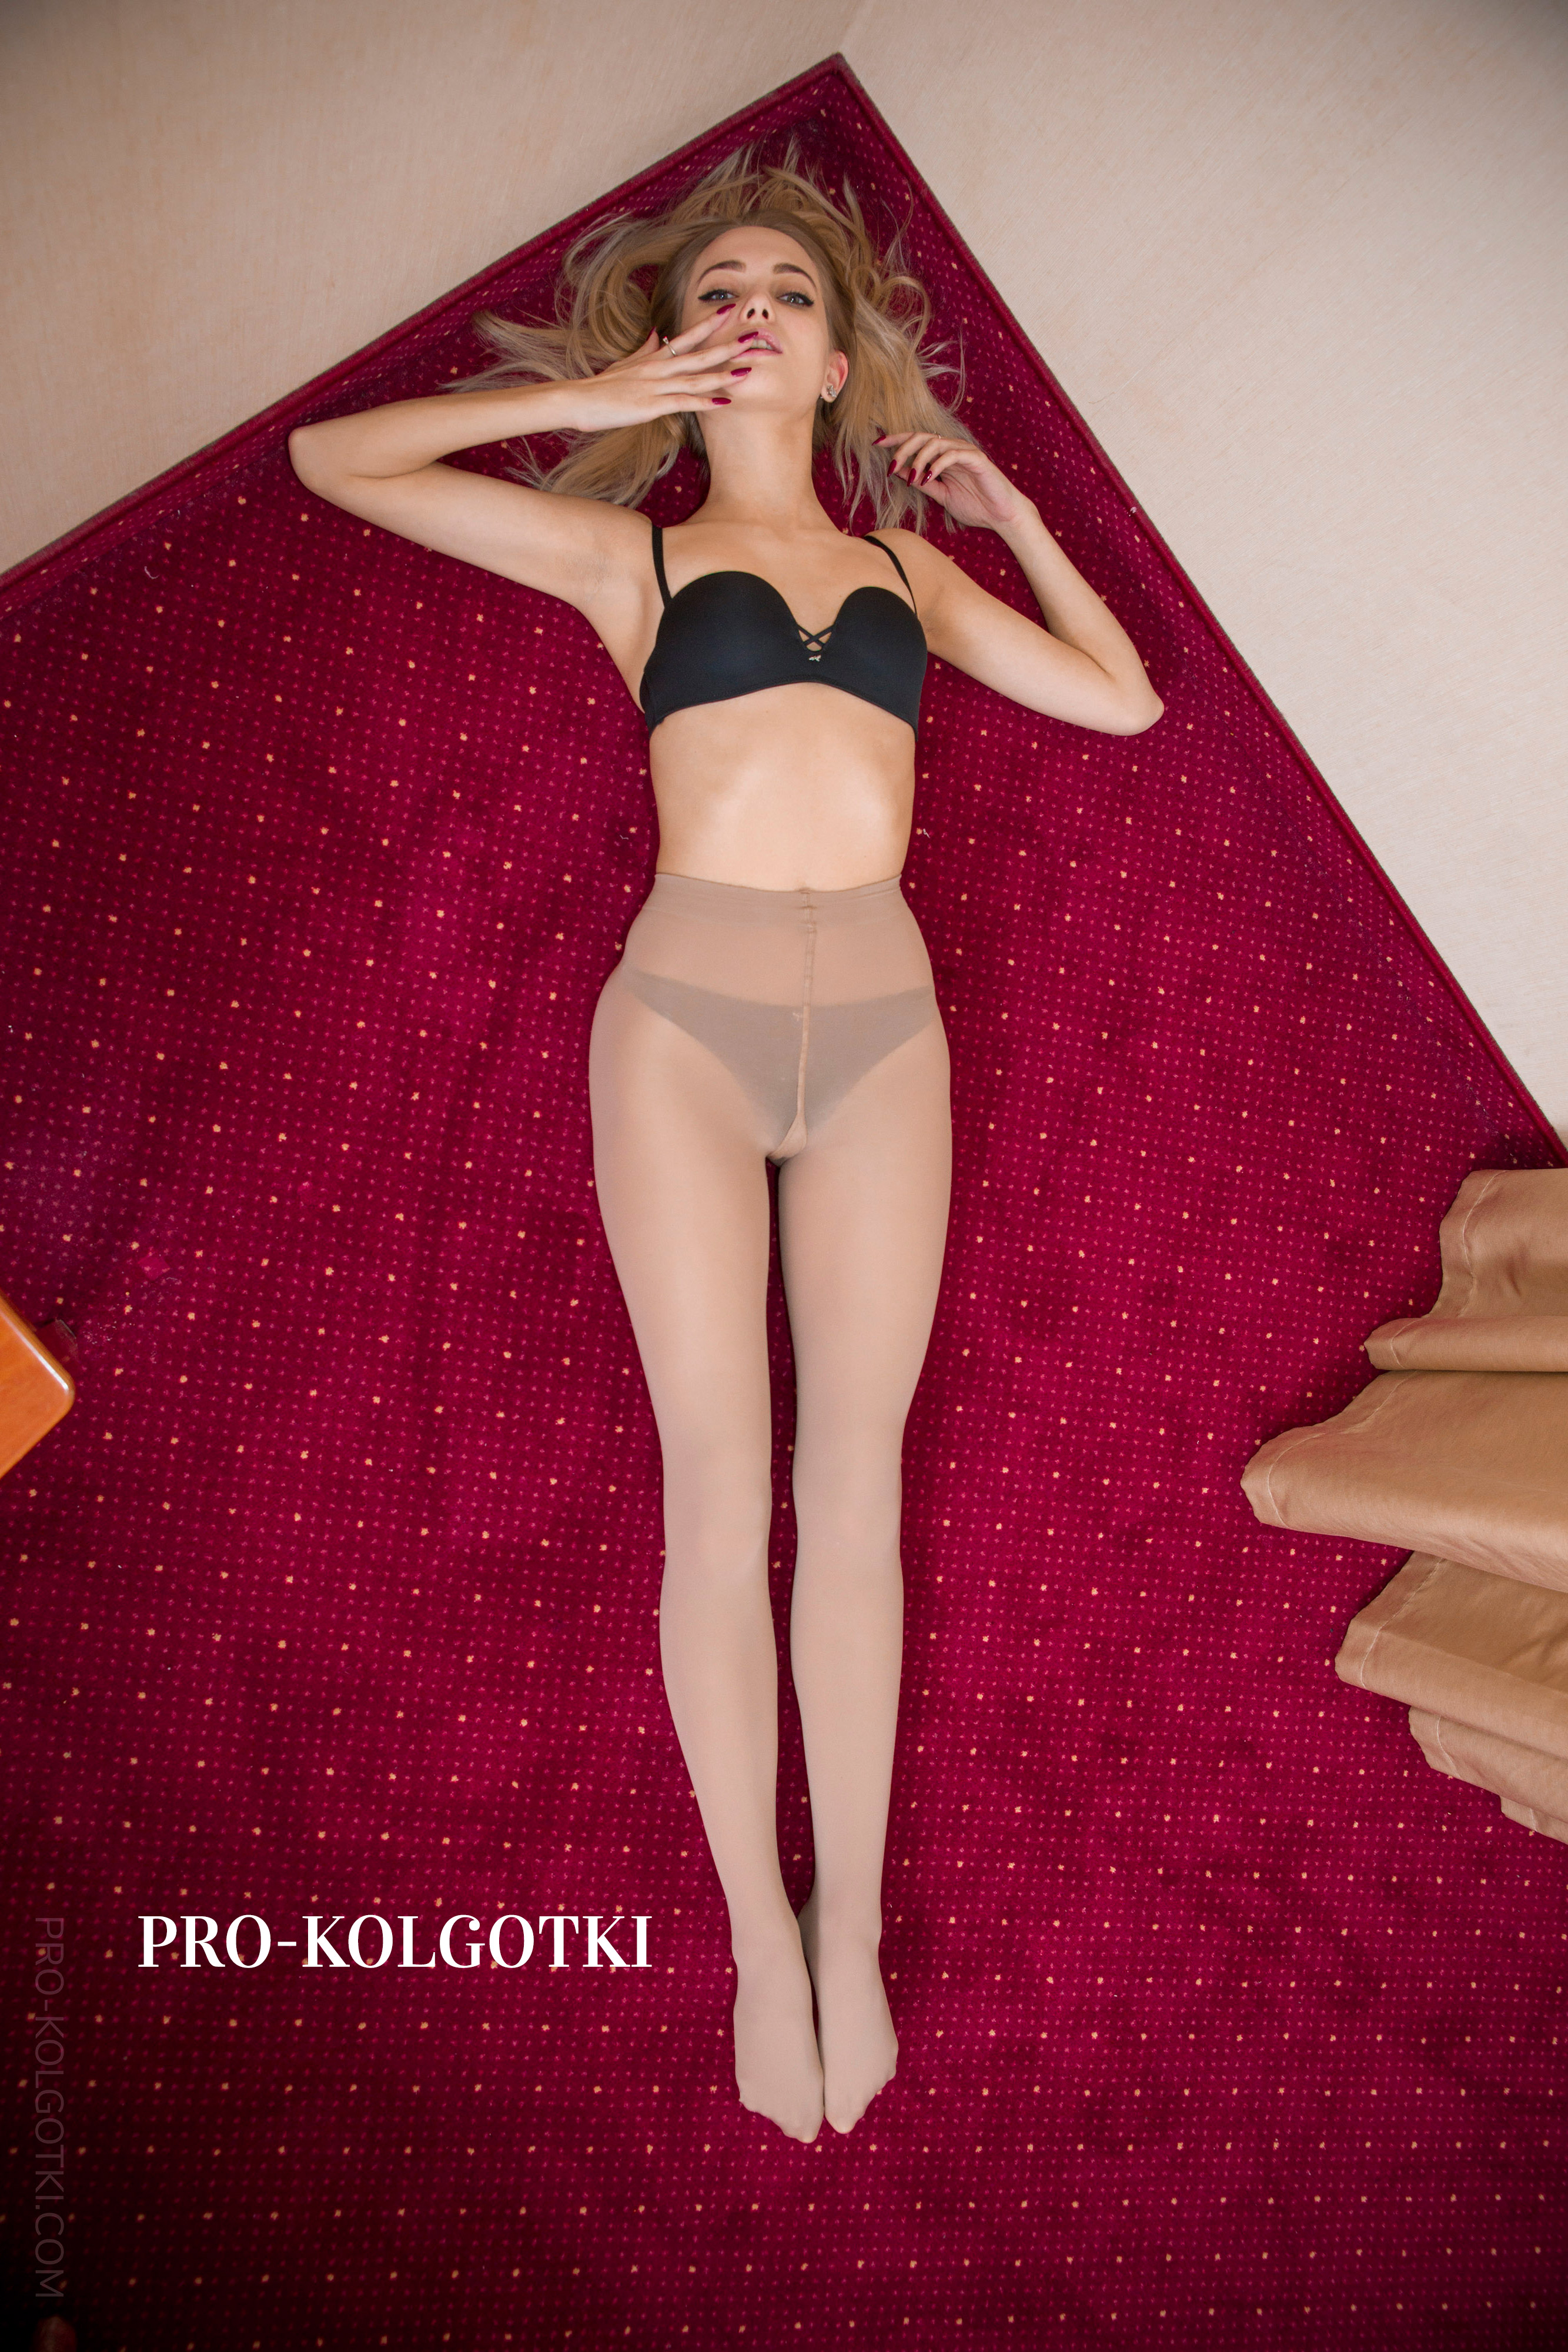 women wearing pantyhose full body - picture from Pantyhose Magazine January 2018 (part 1)